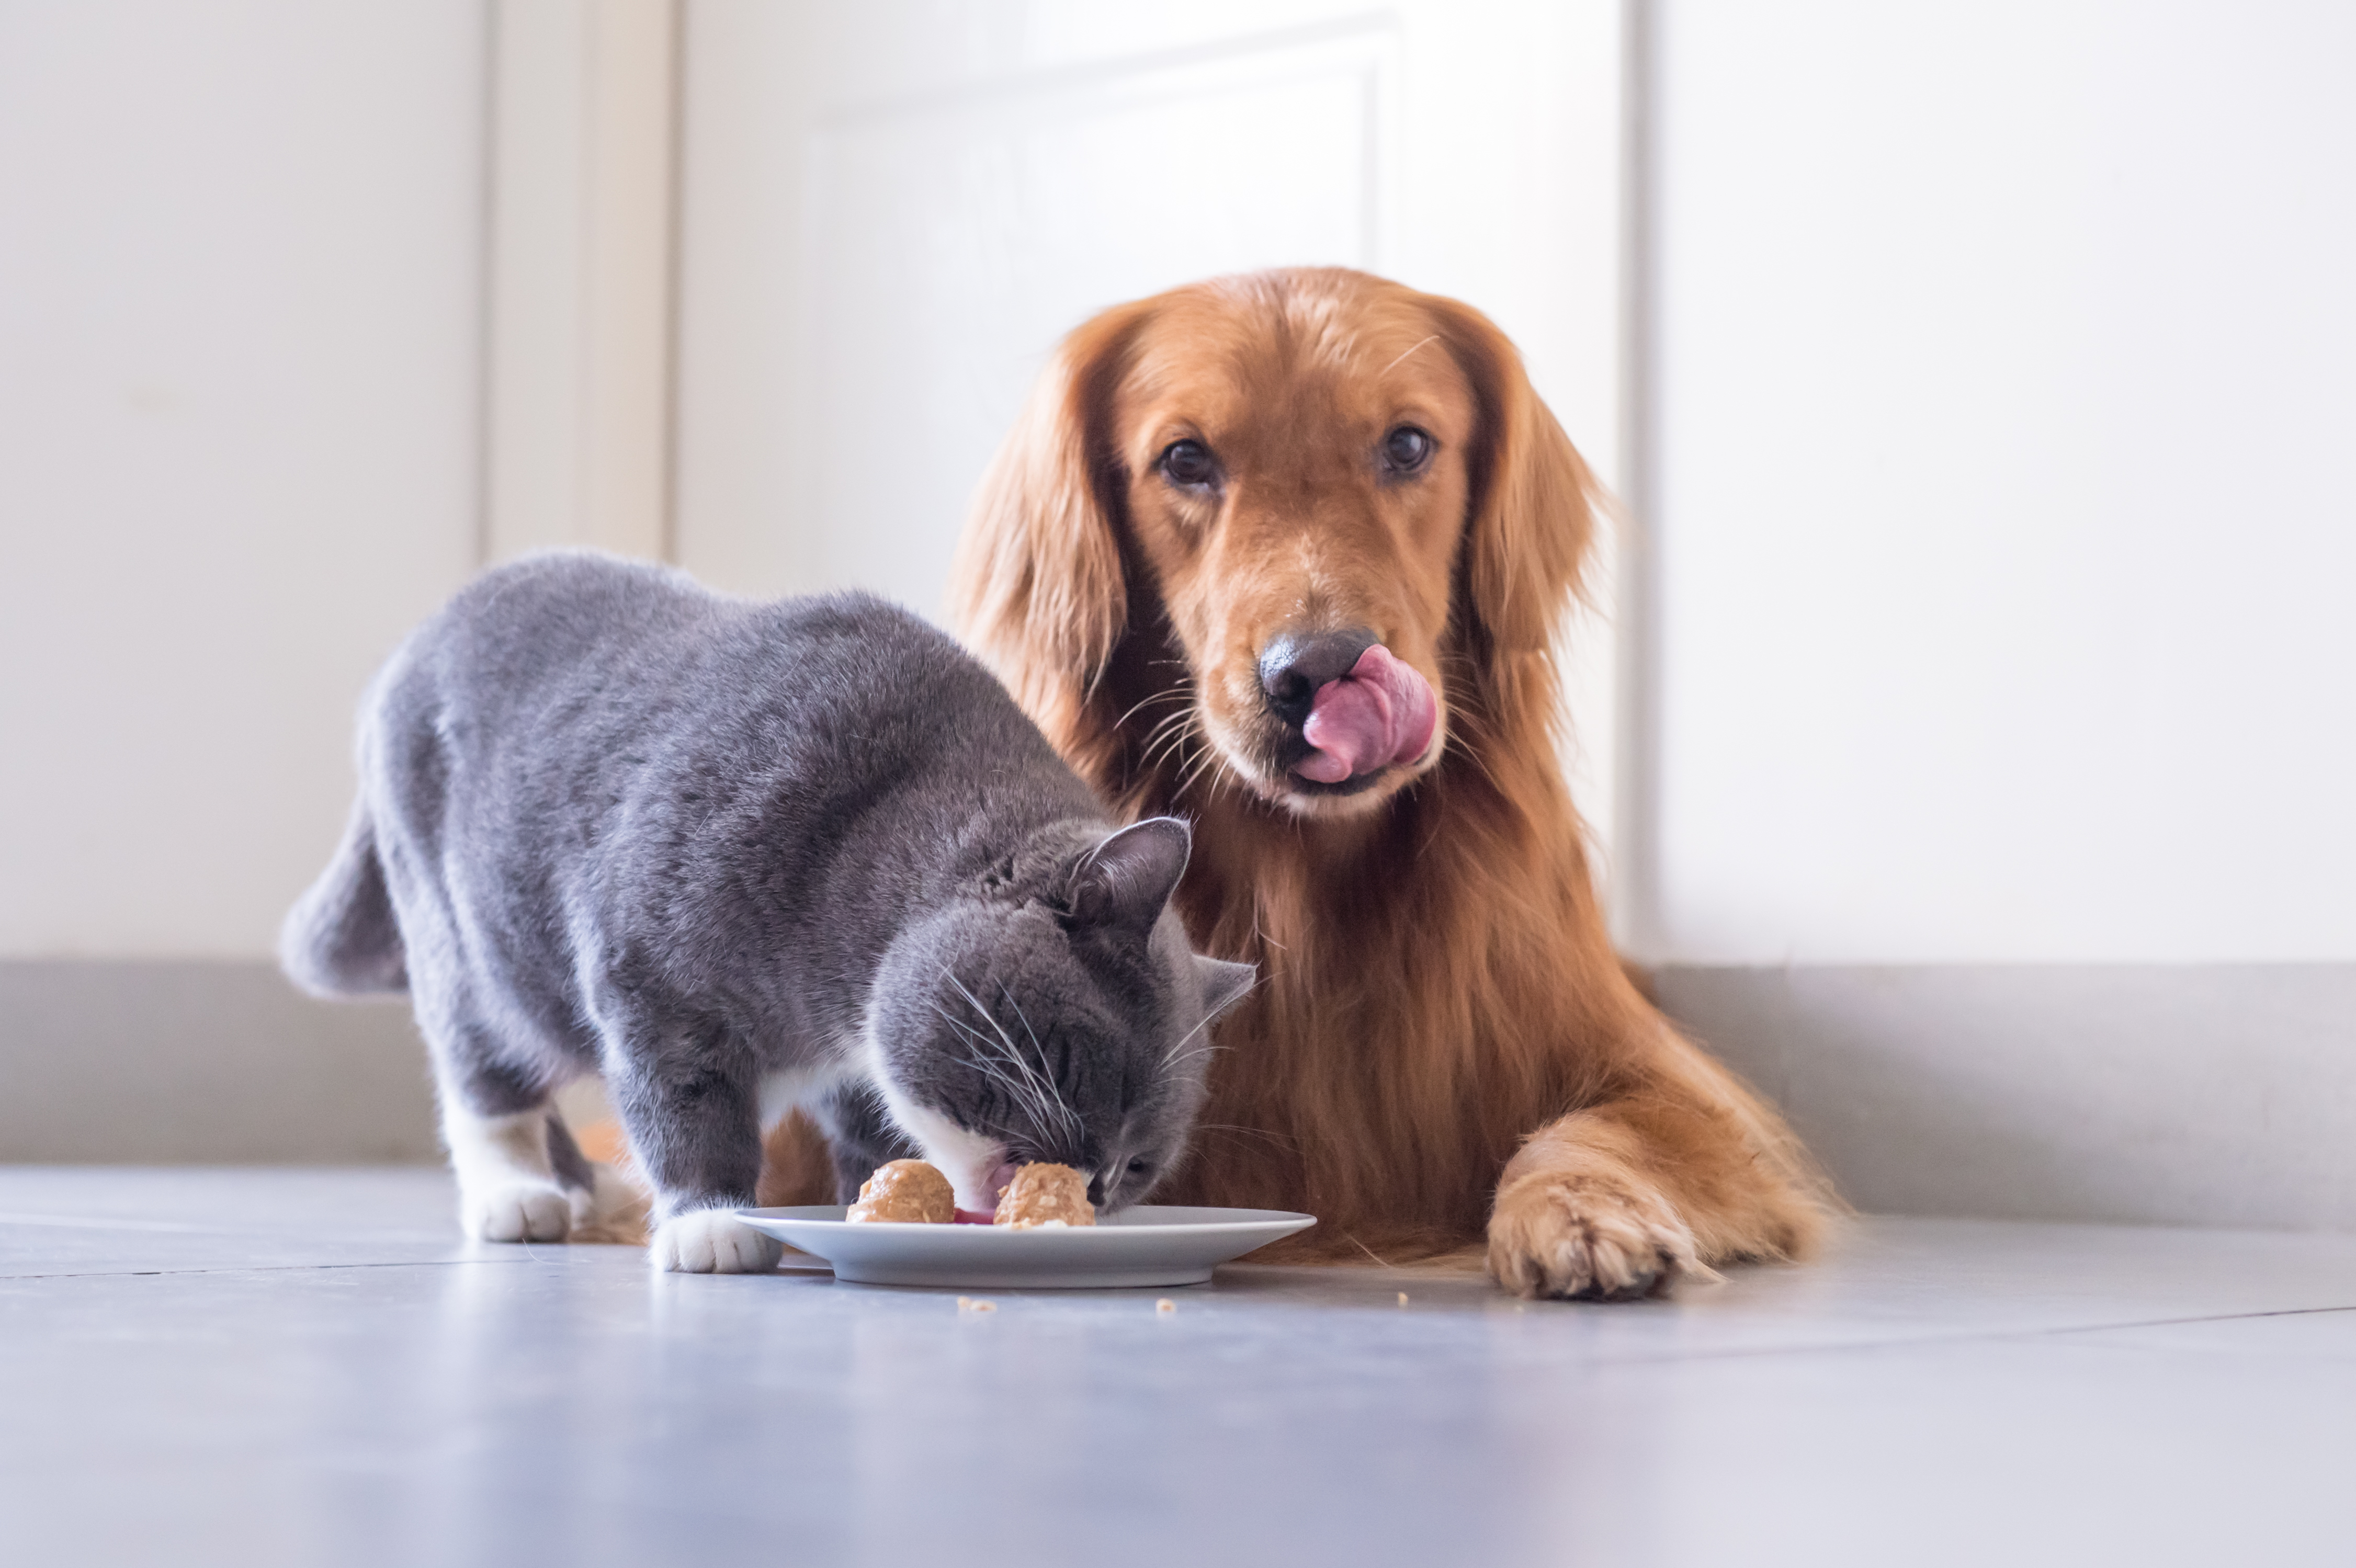 Picky pet prescription What to do when your pet won’t eat her